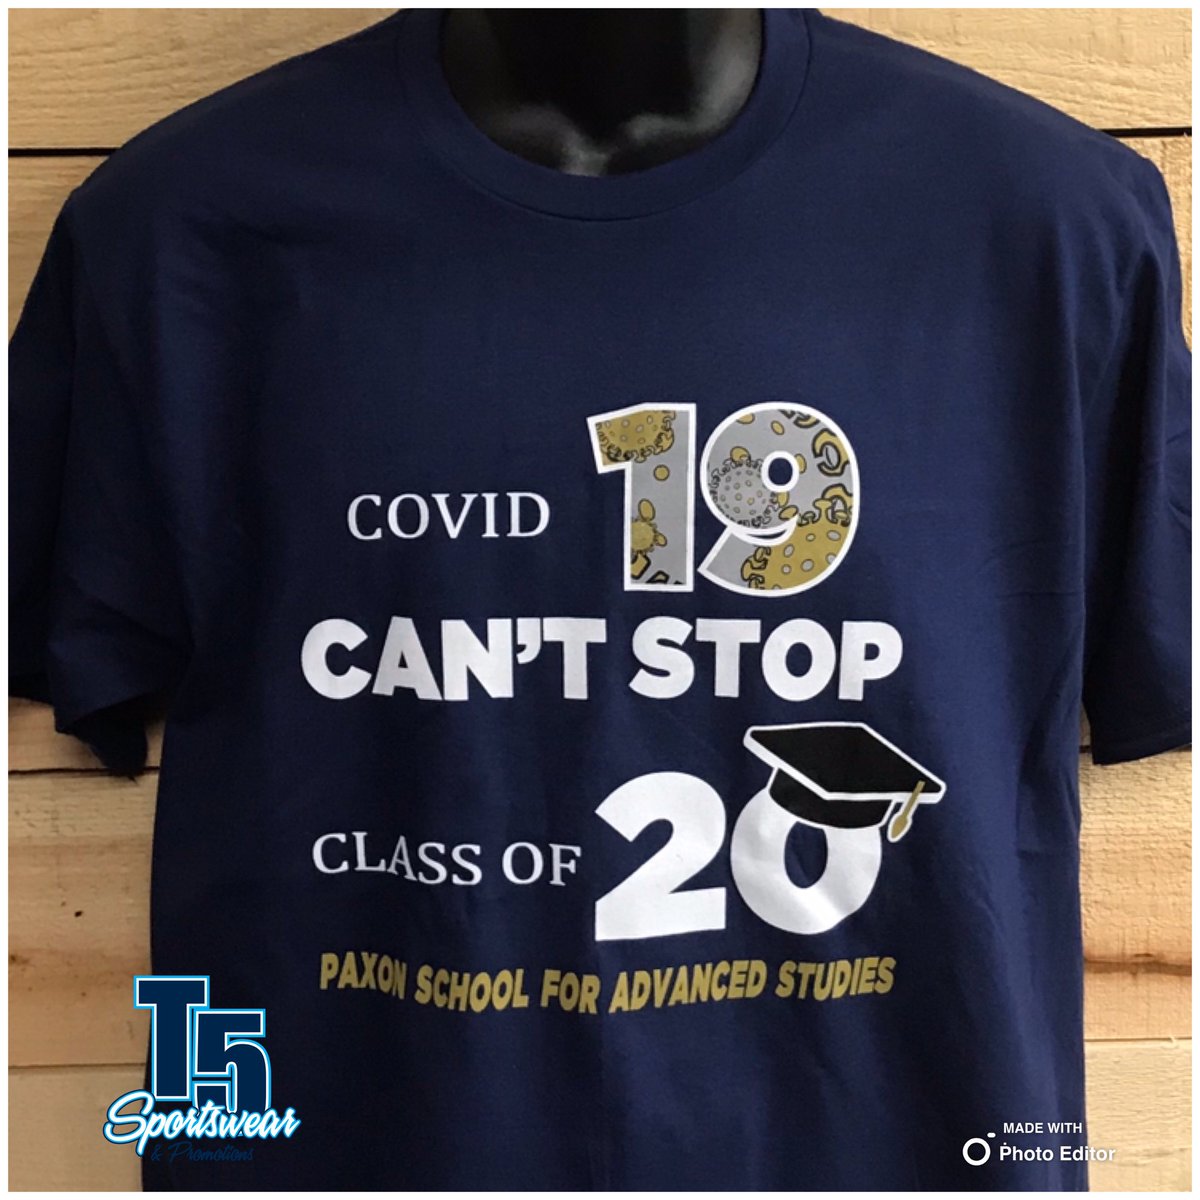 We really like this shirt for Paxon School for Advanced Studies!  #TeamDuval #ChooseStrength